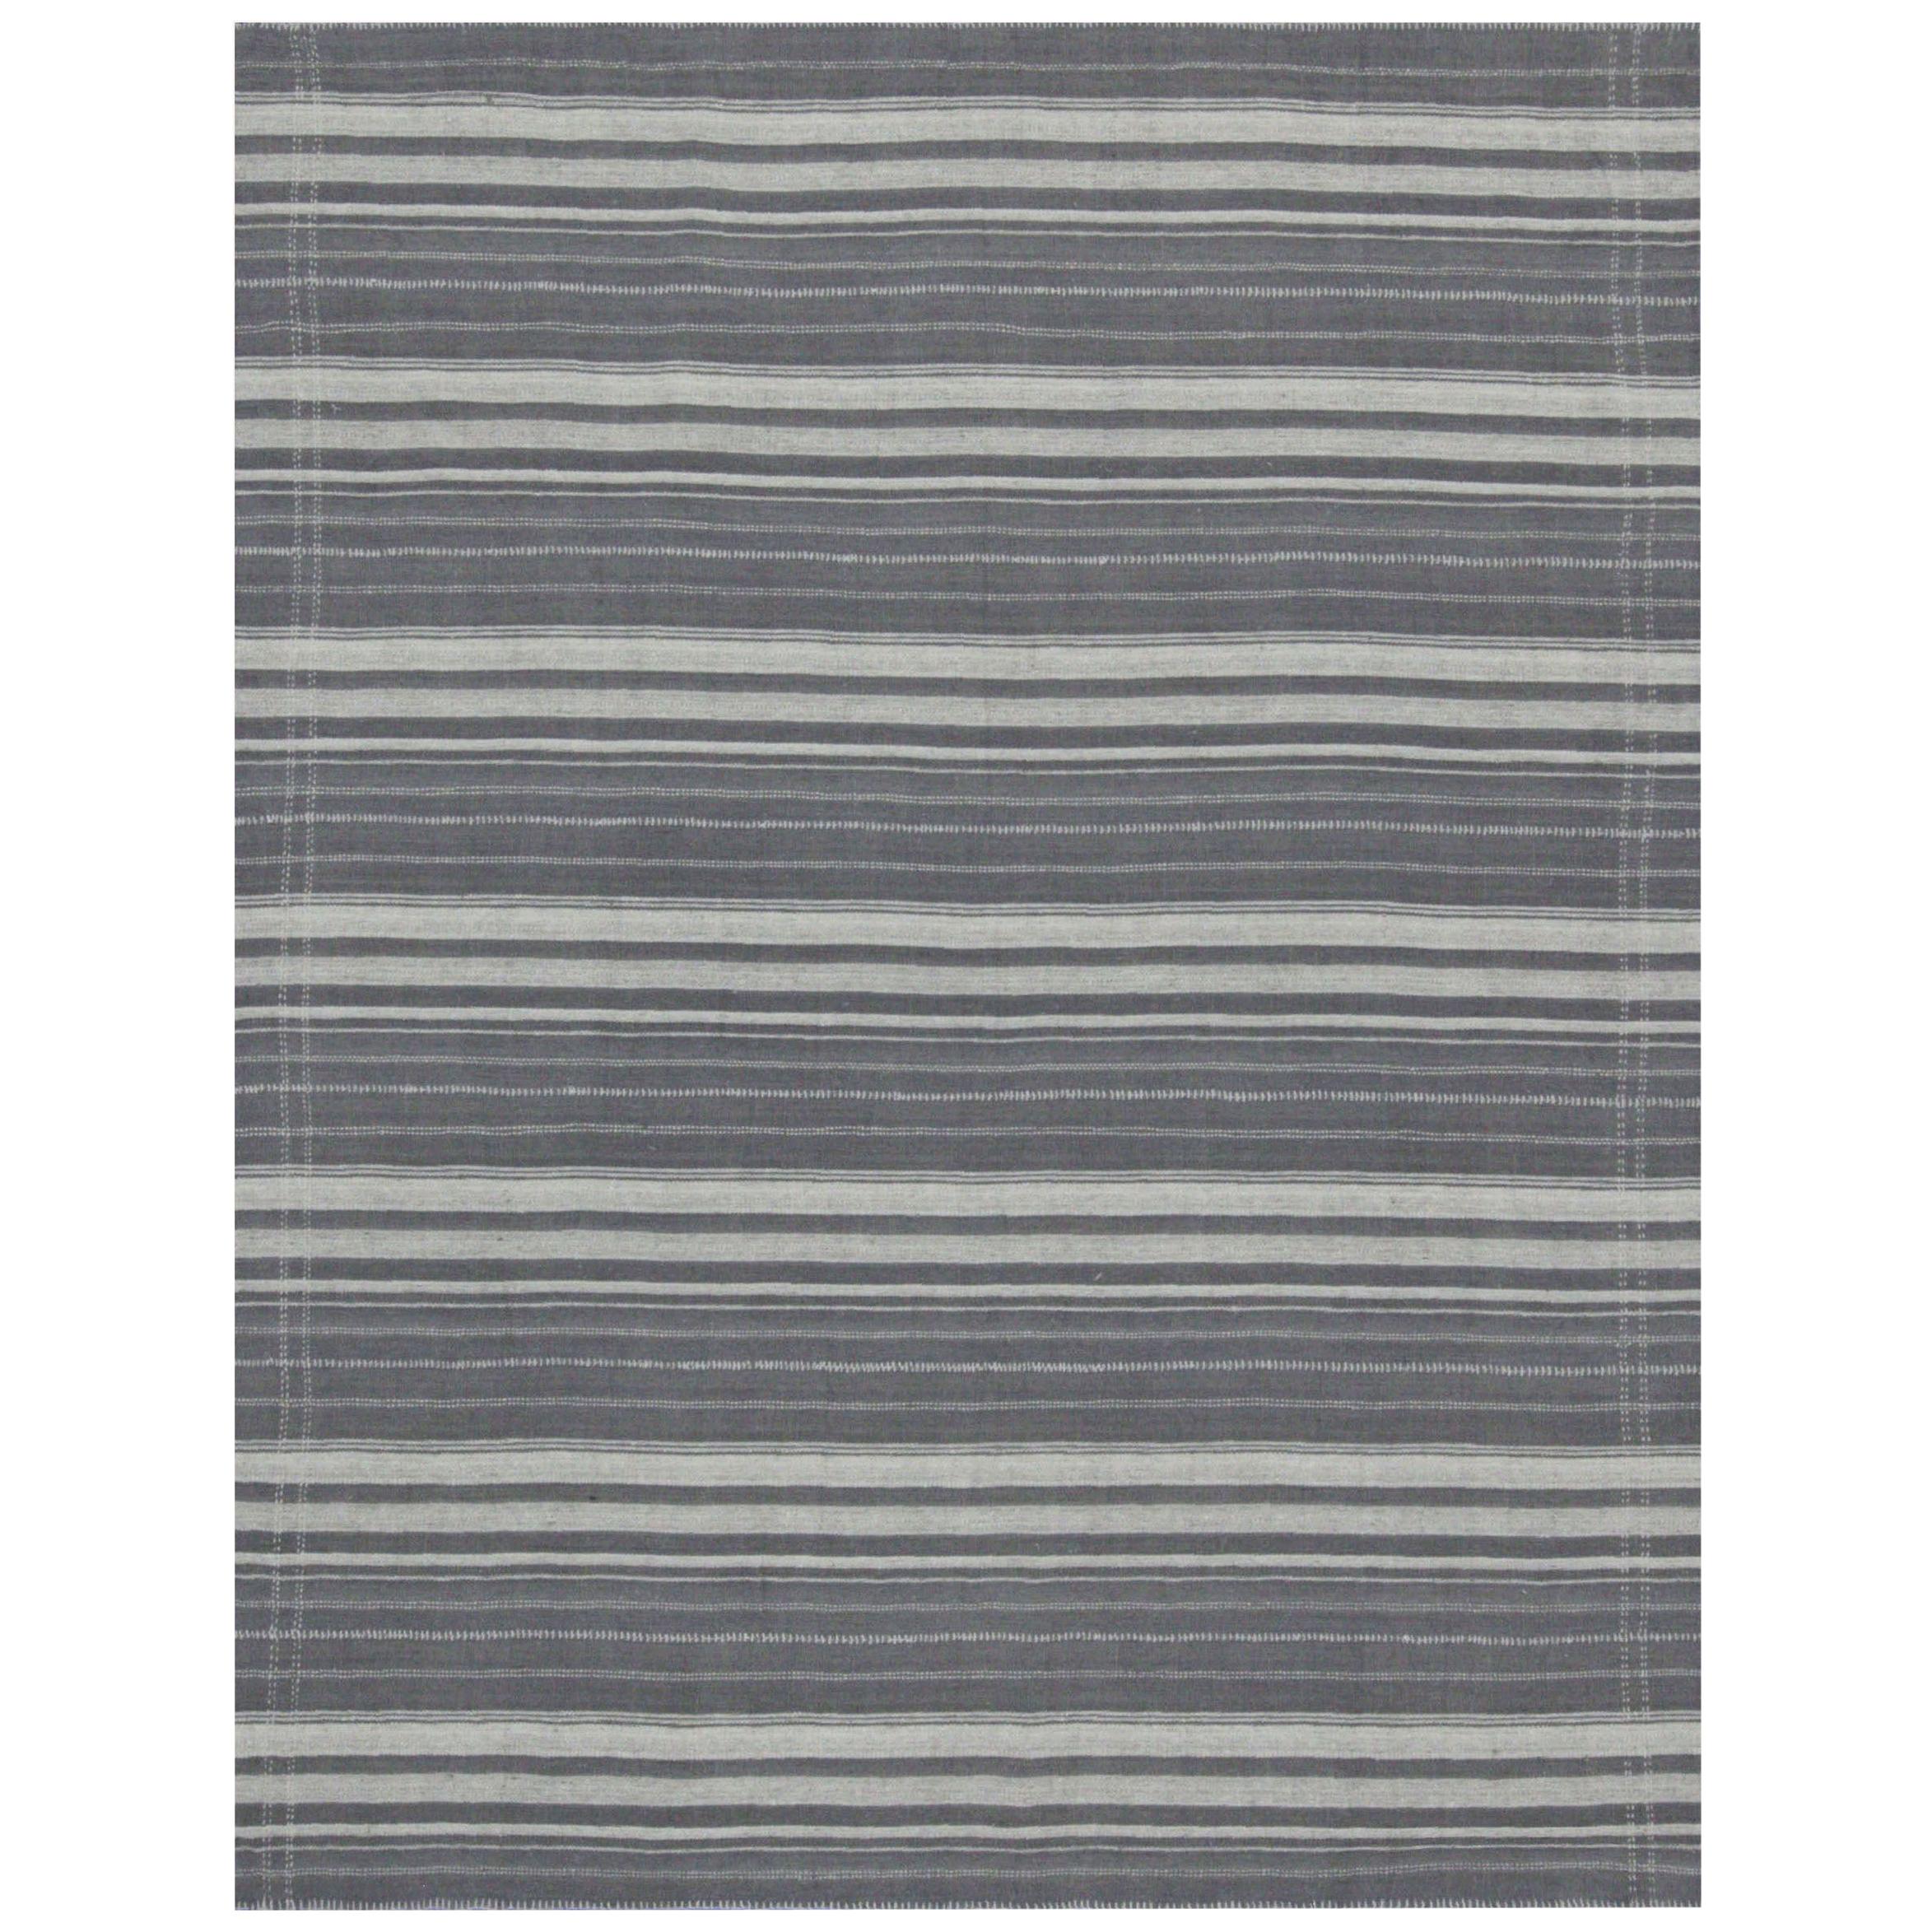 Modern Kilim Rug with Ivory, Gray and White Stripes